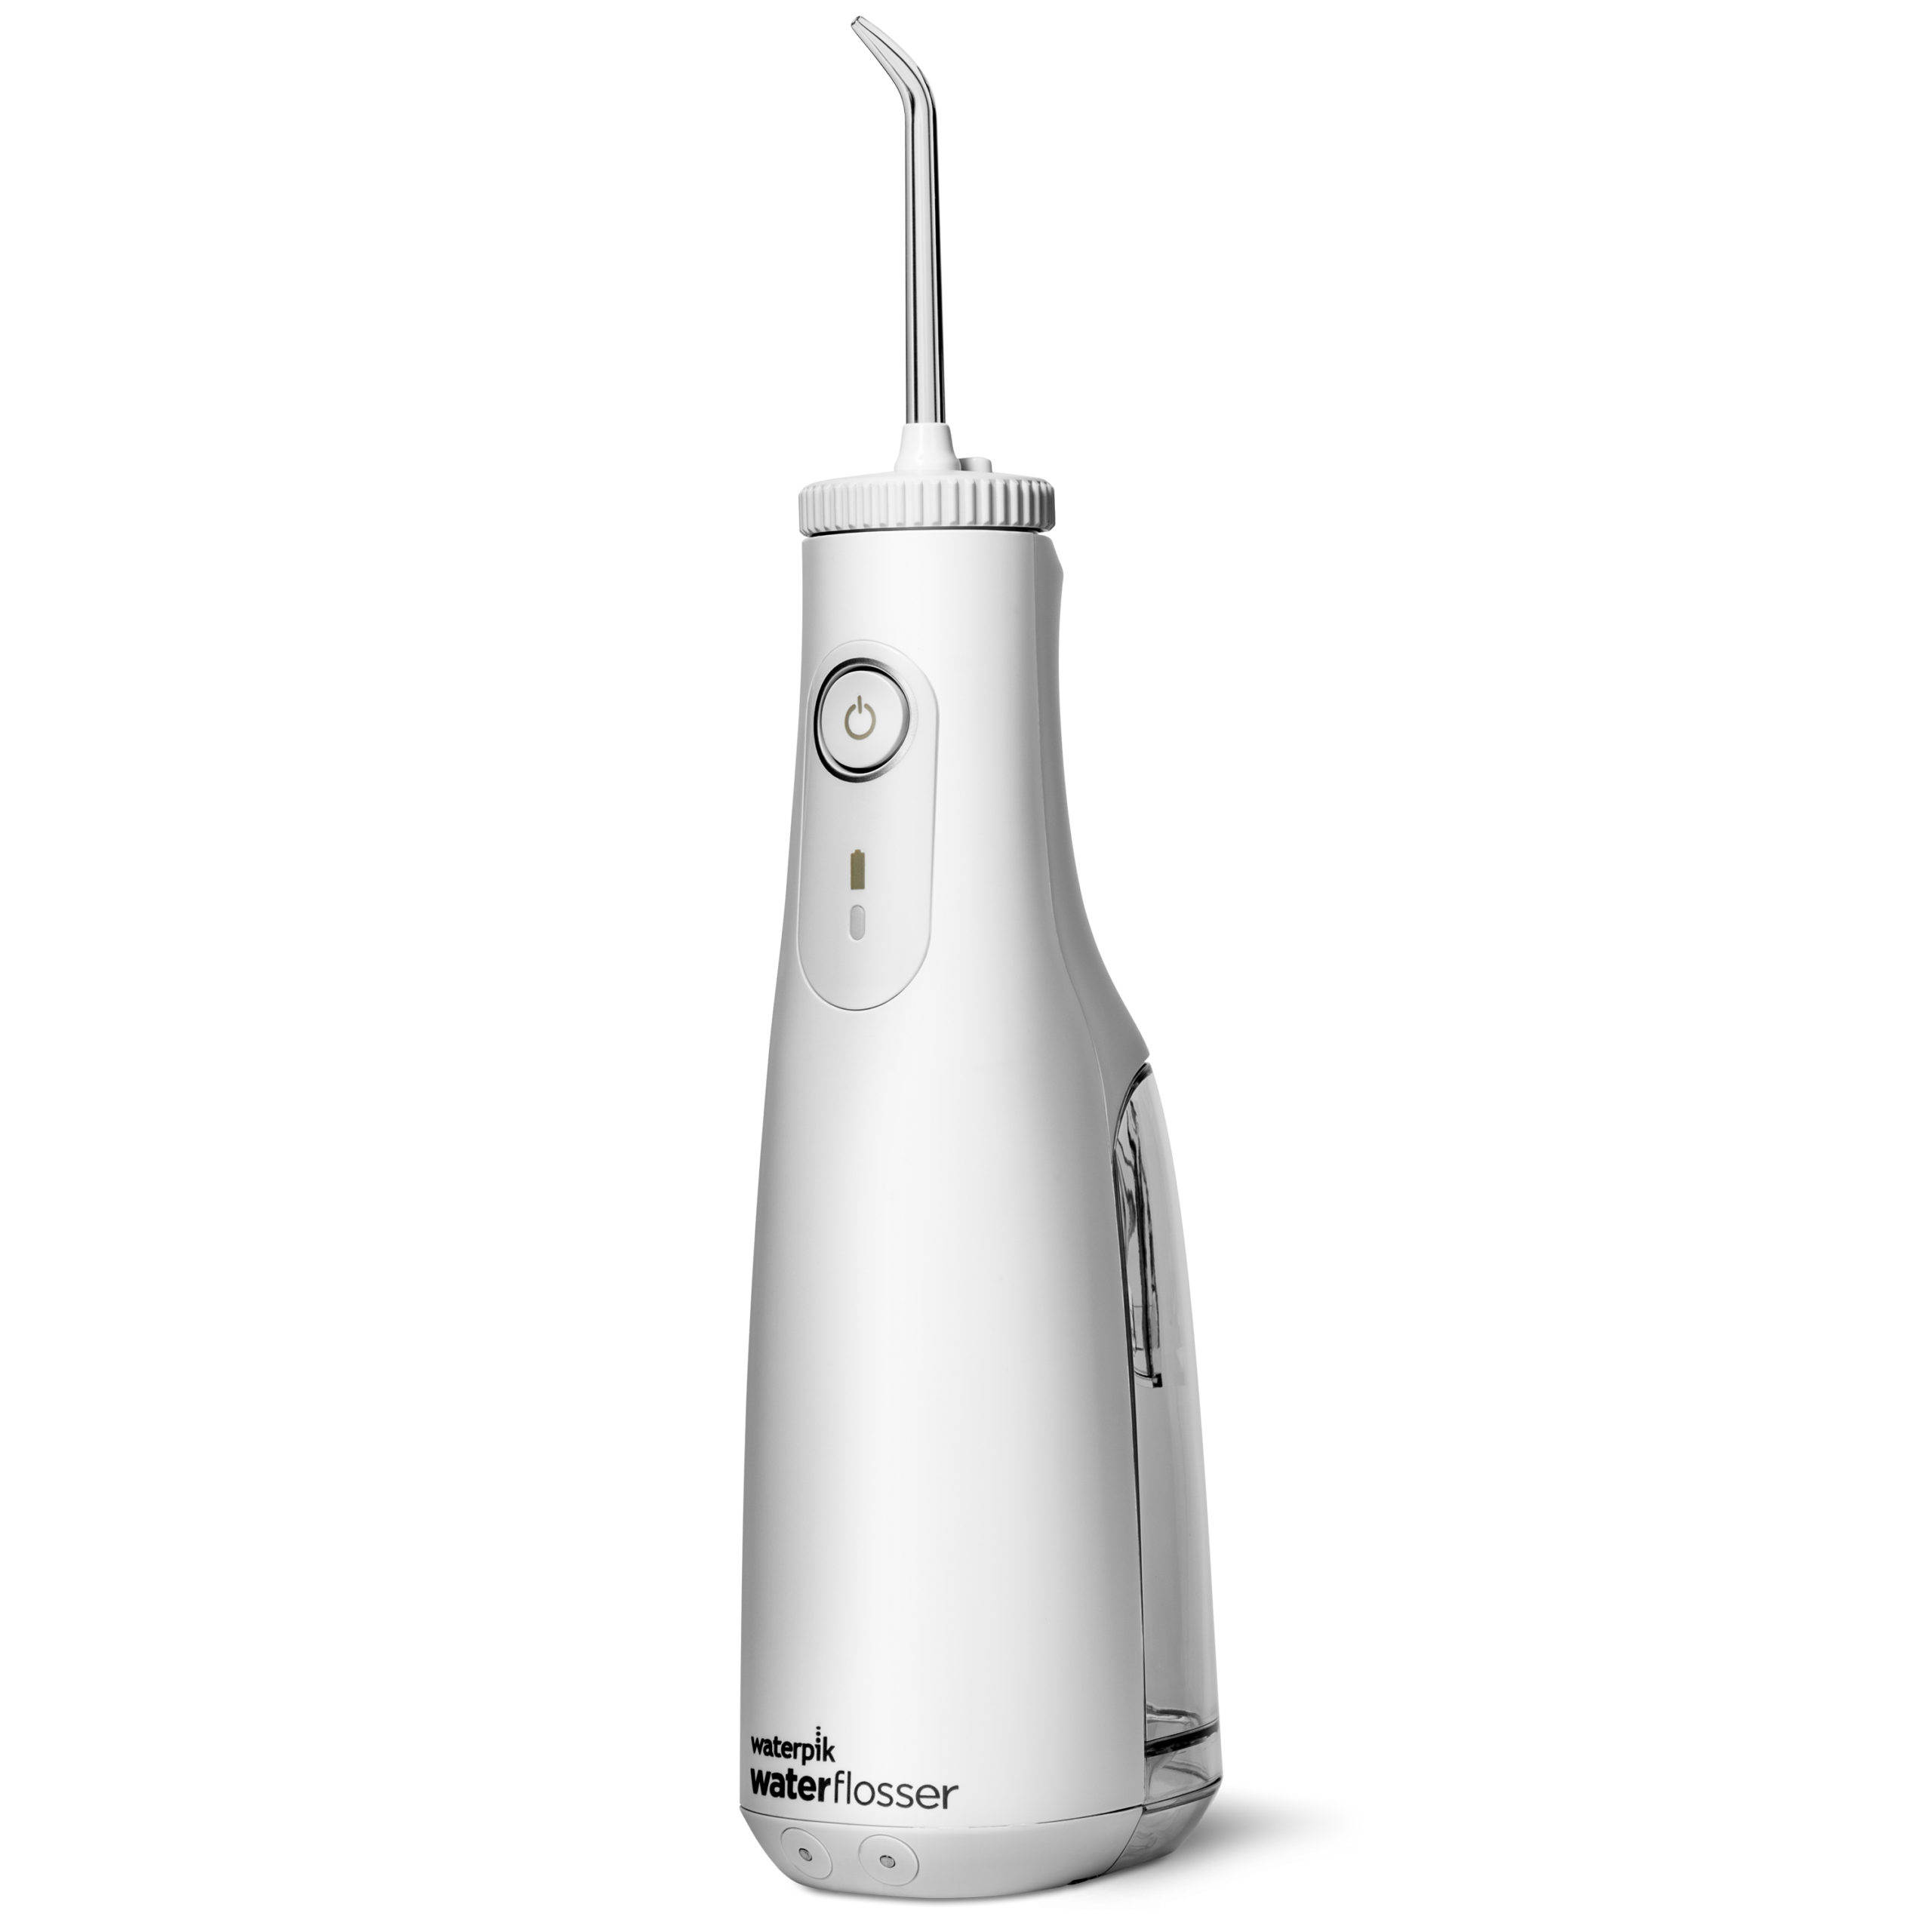 The Waterpik cordless flosser is great for oral hygiene